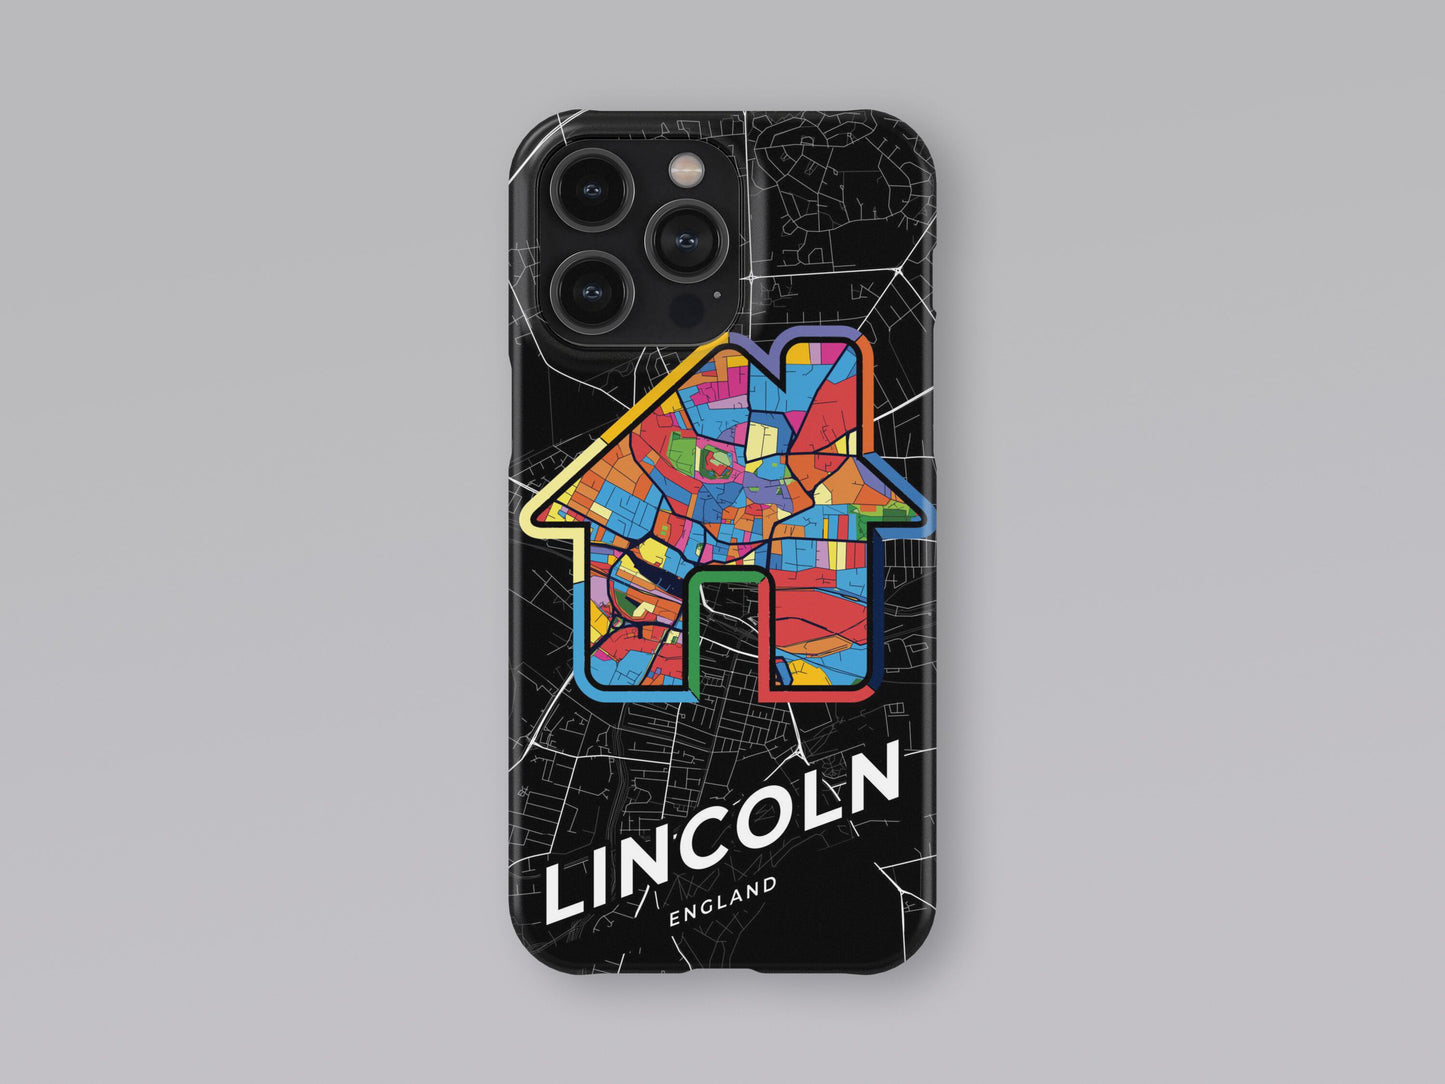 Lincoln England slim phone case with colorful icon. Birthday, wedding or housewarming gift. Couple match cases. 3